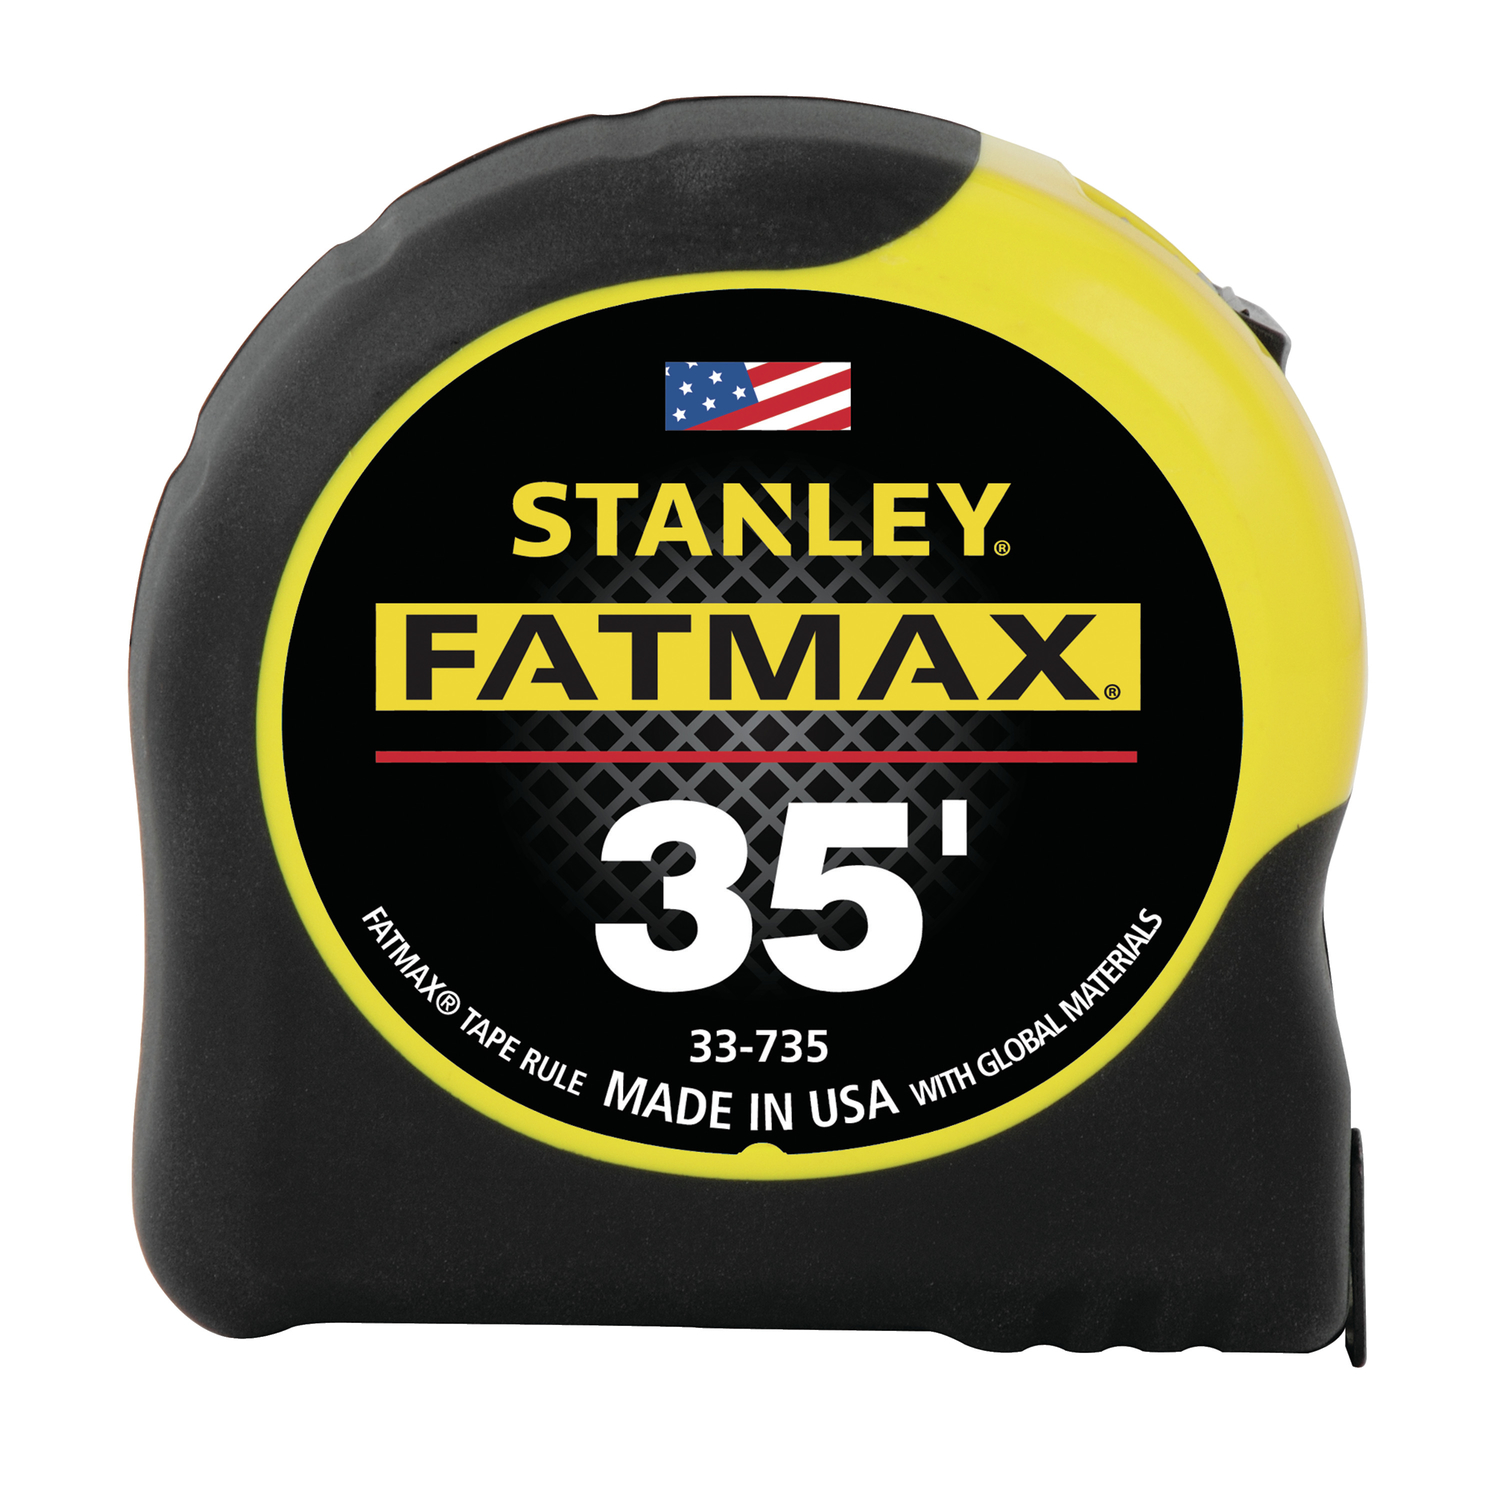 Photos - Tape Measure and Surveyor Tape Stanley FatMax 35 ft. L X 1.25 in. W Tape Measure 1 pk 33-735 